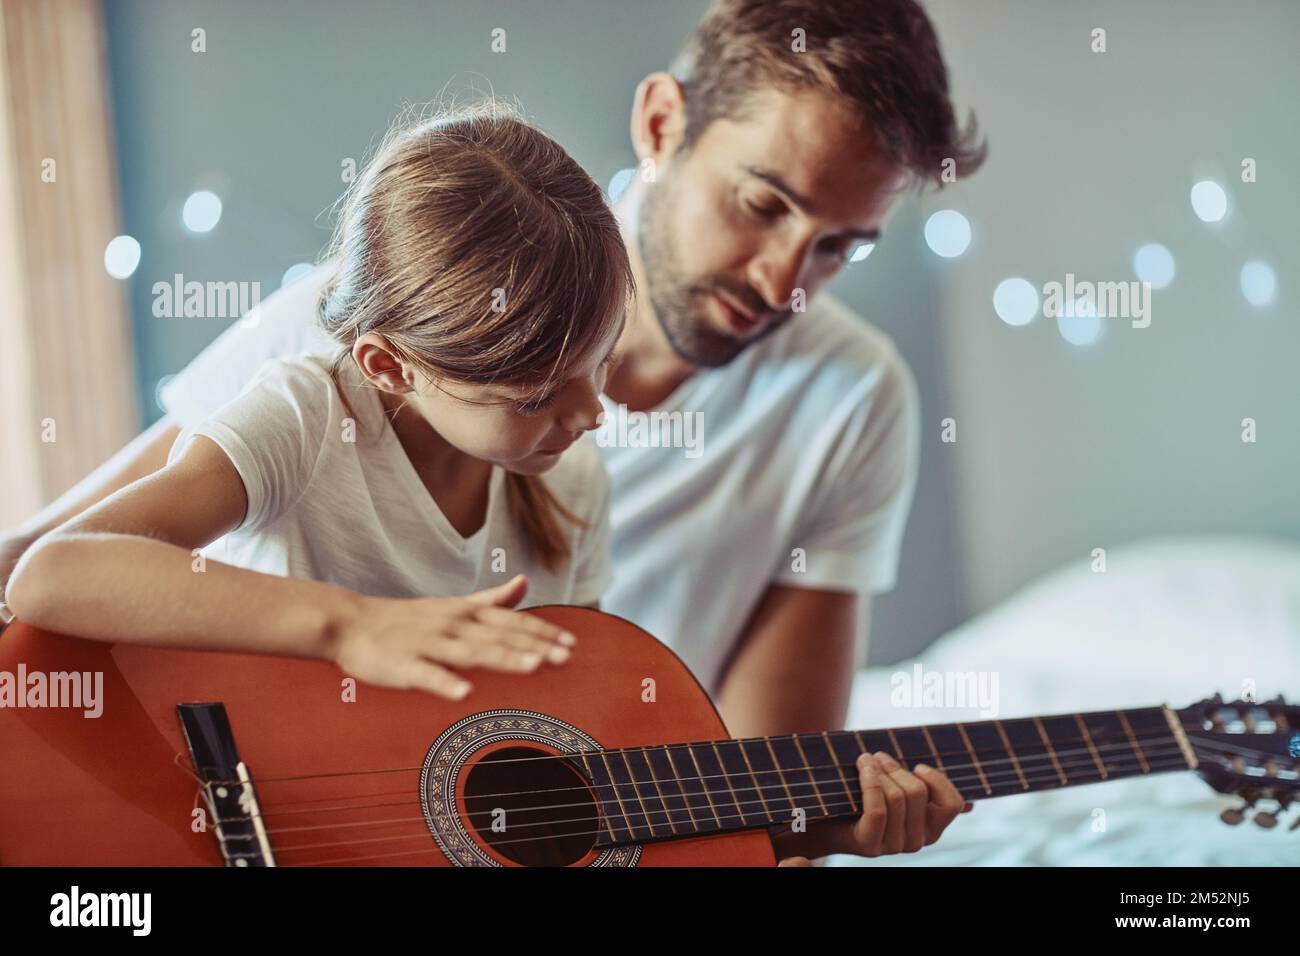 Making beautiful music together. a little girl playing the guitar with her father. Stock Photo